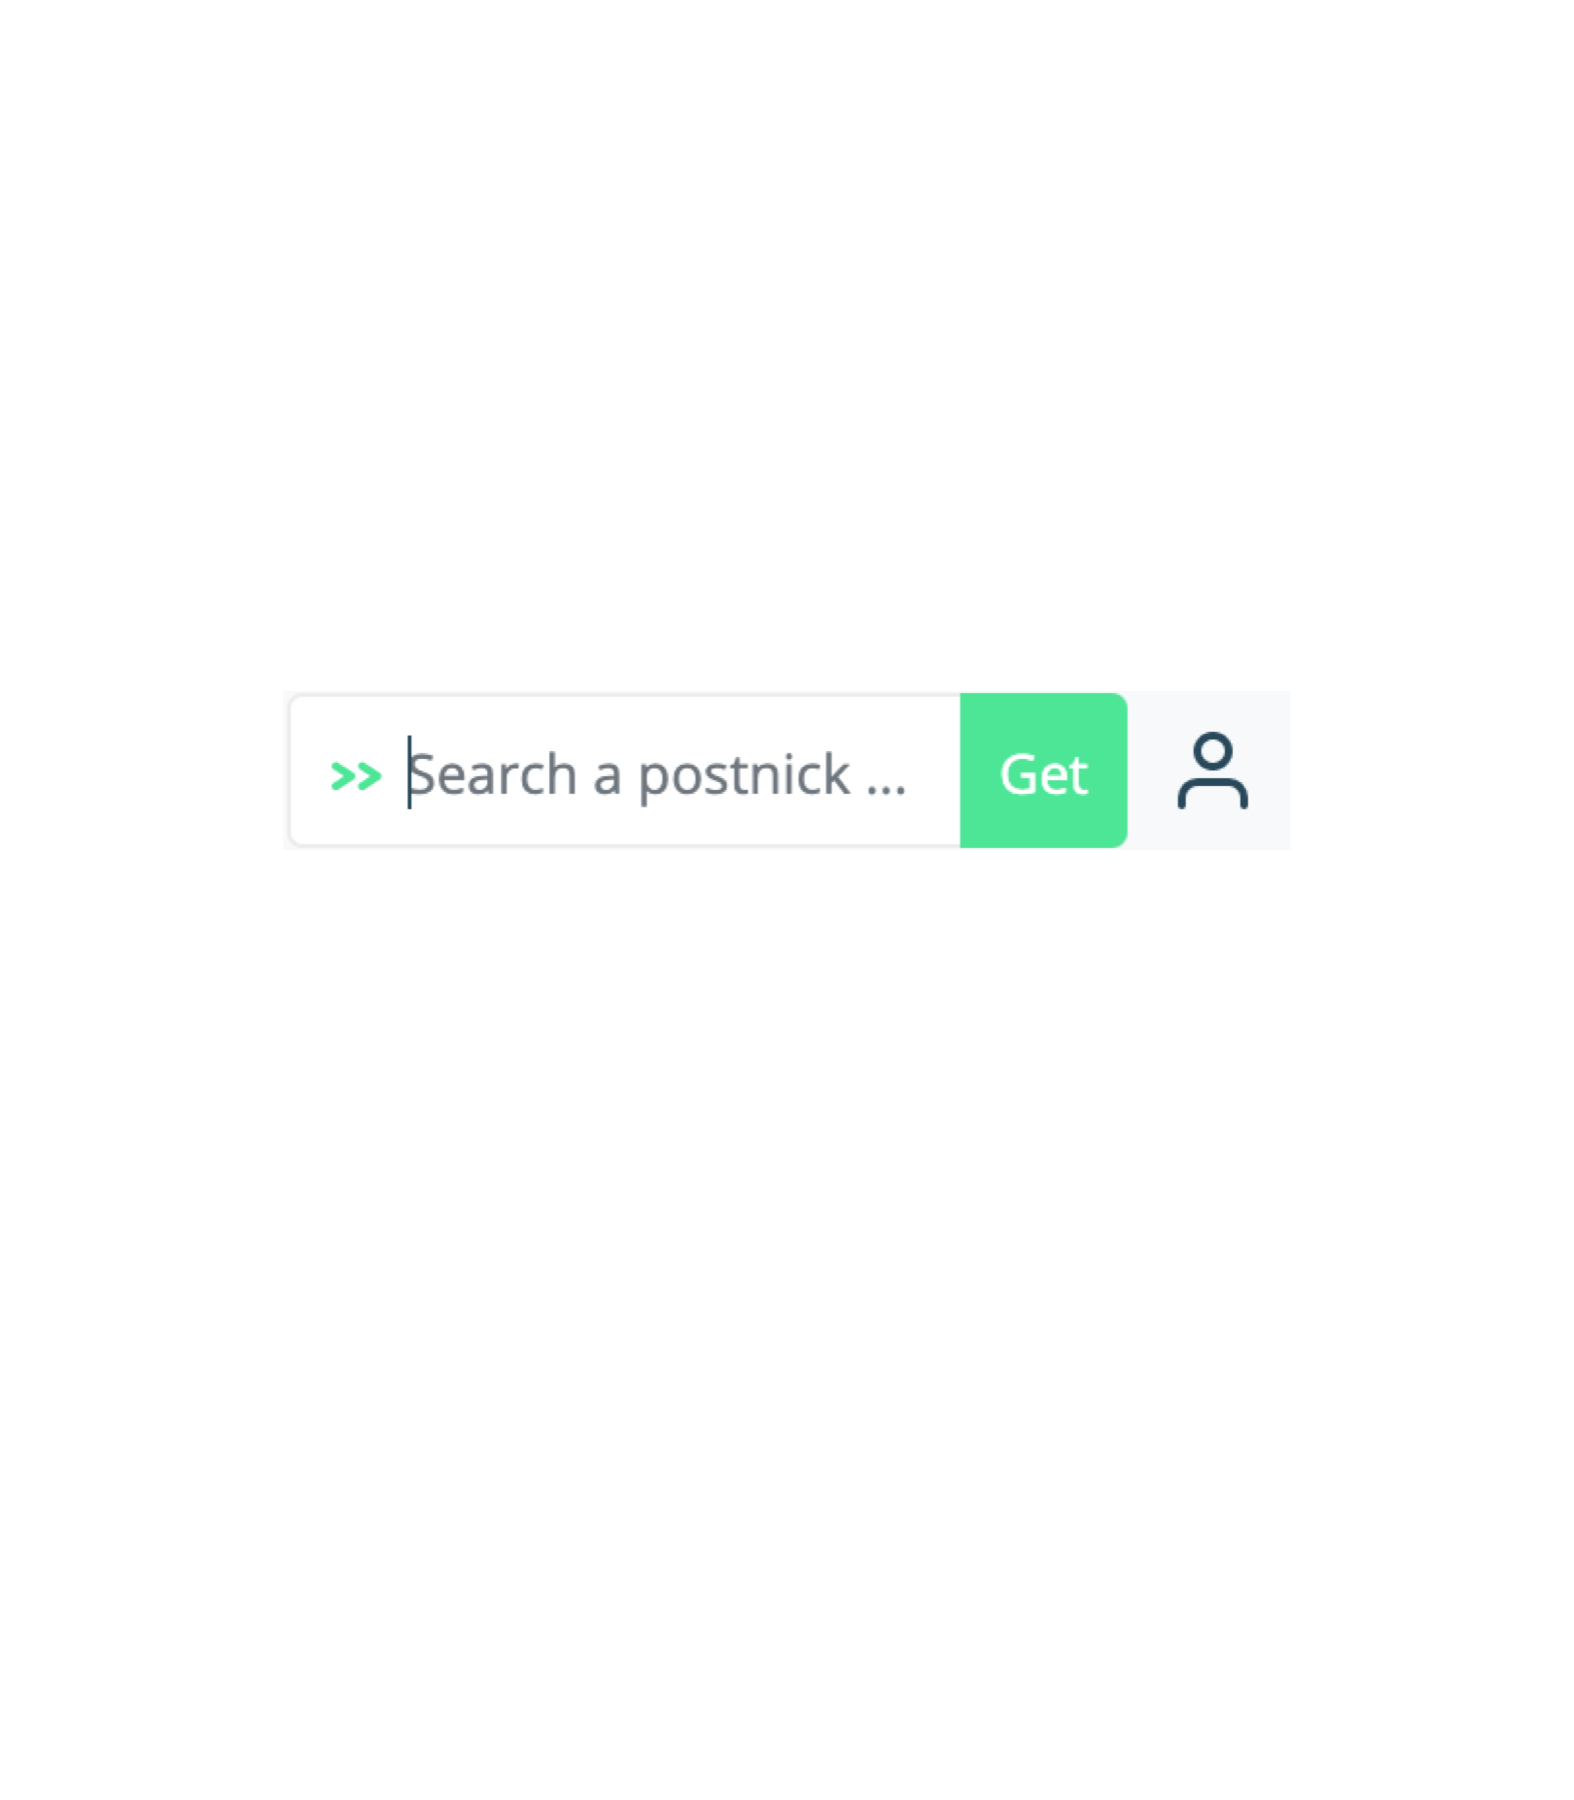 When users hover over the Postnick button, they will be able to search for postnicks to get addresses or they can select addresses directly from their Postnick accounts.